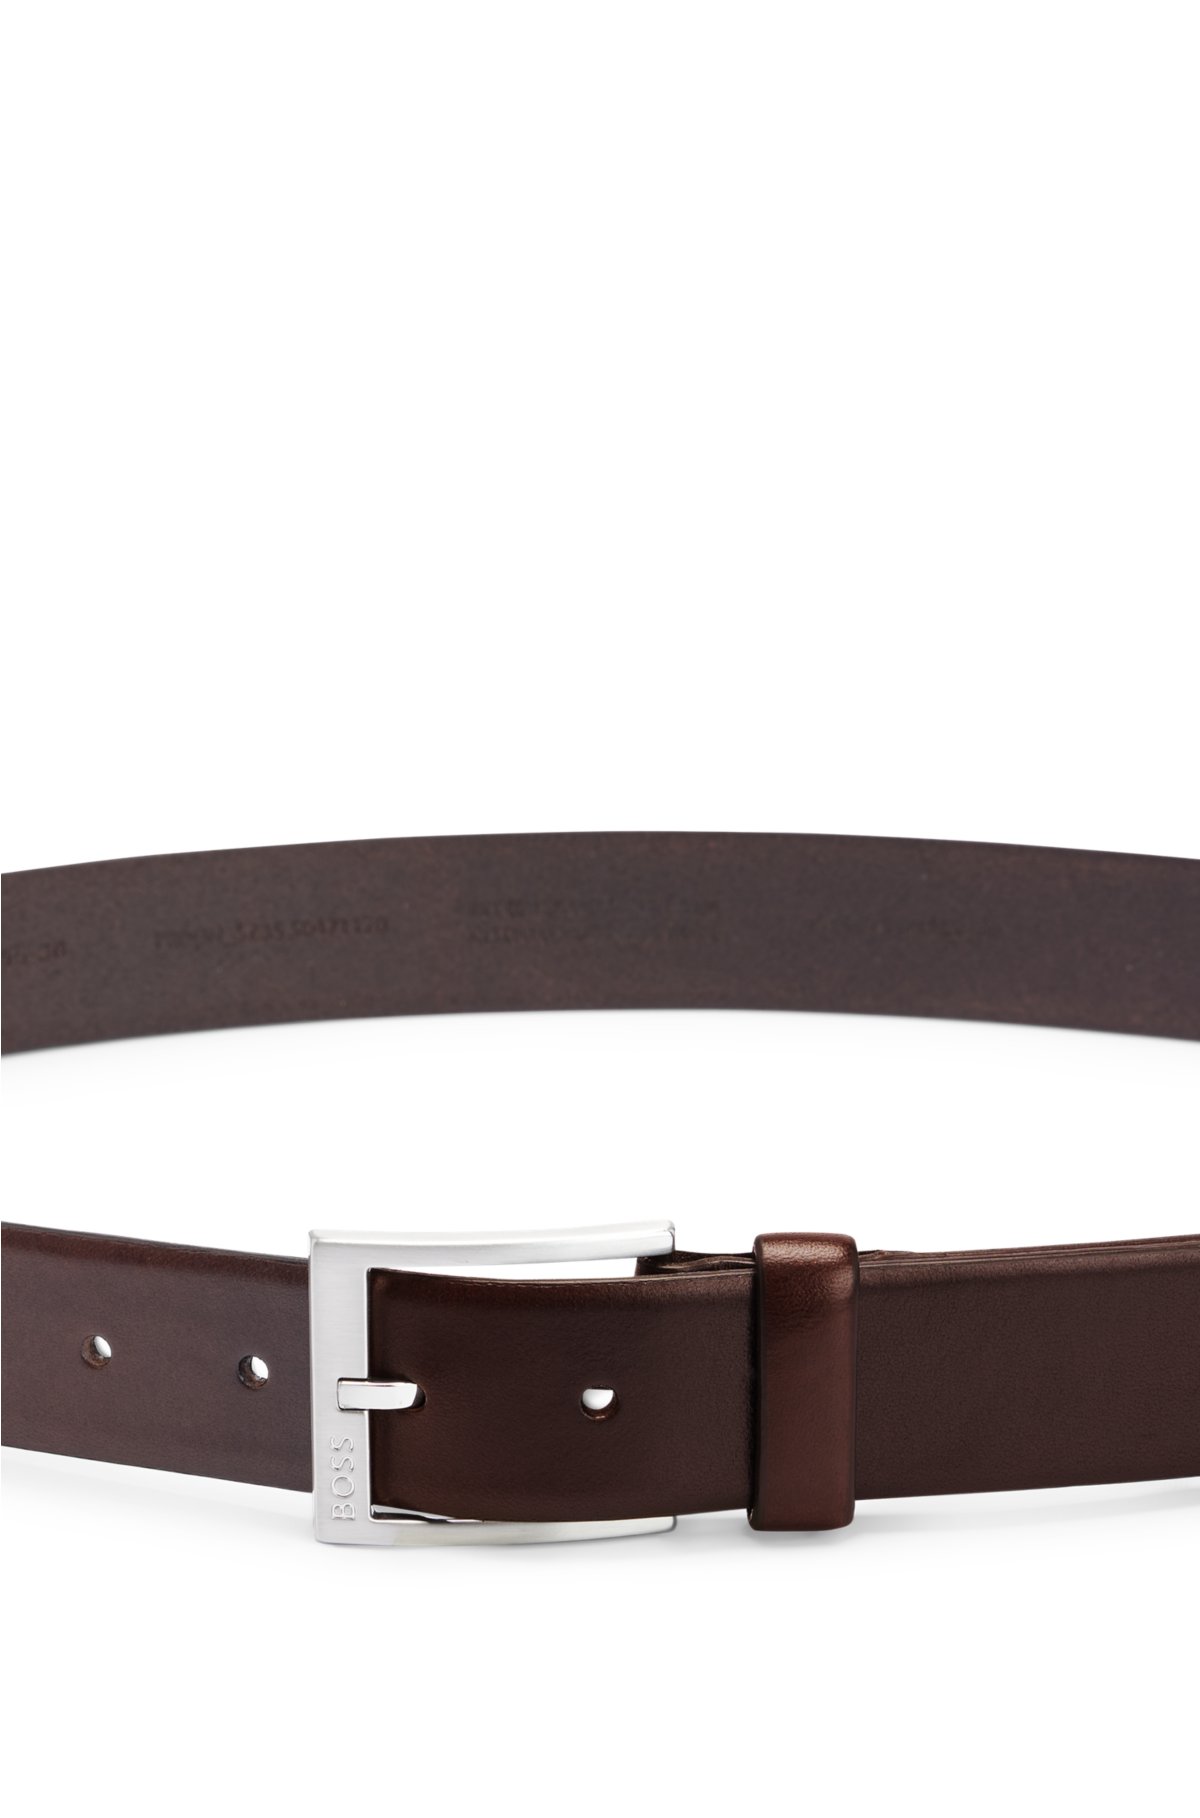 Boss Men's Leather Belt with Brushed Effect Buckle